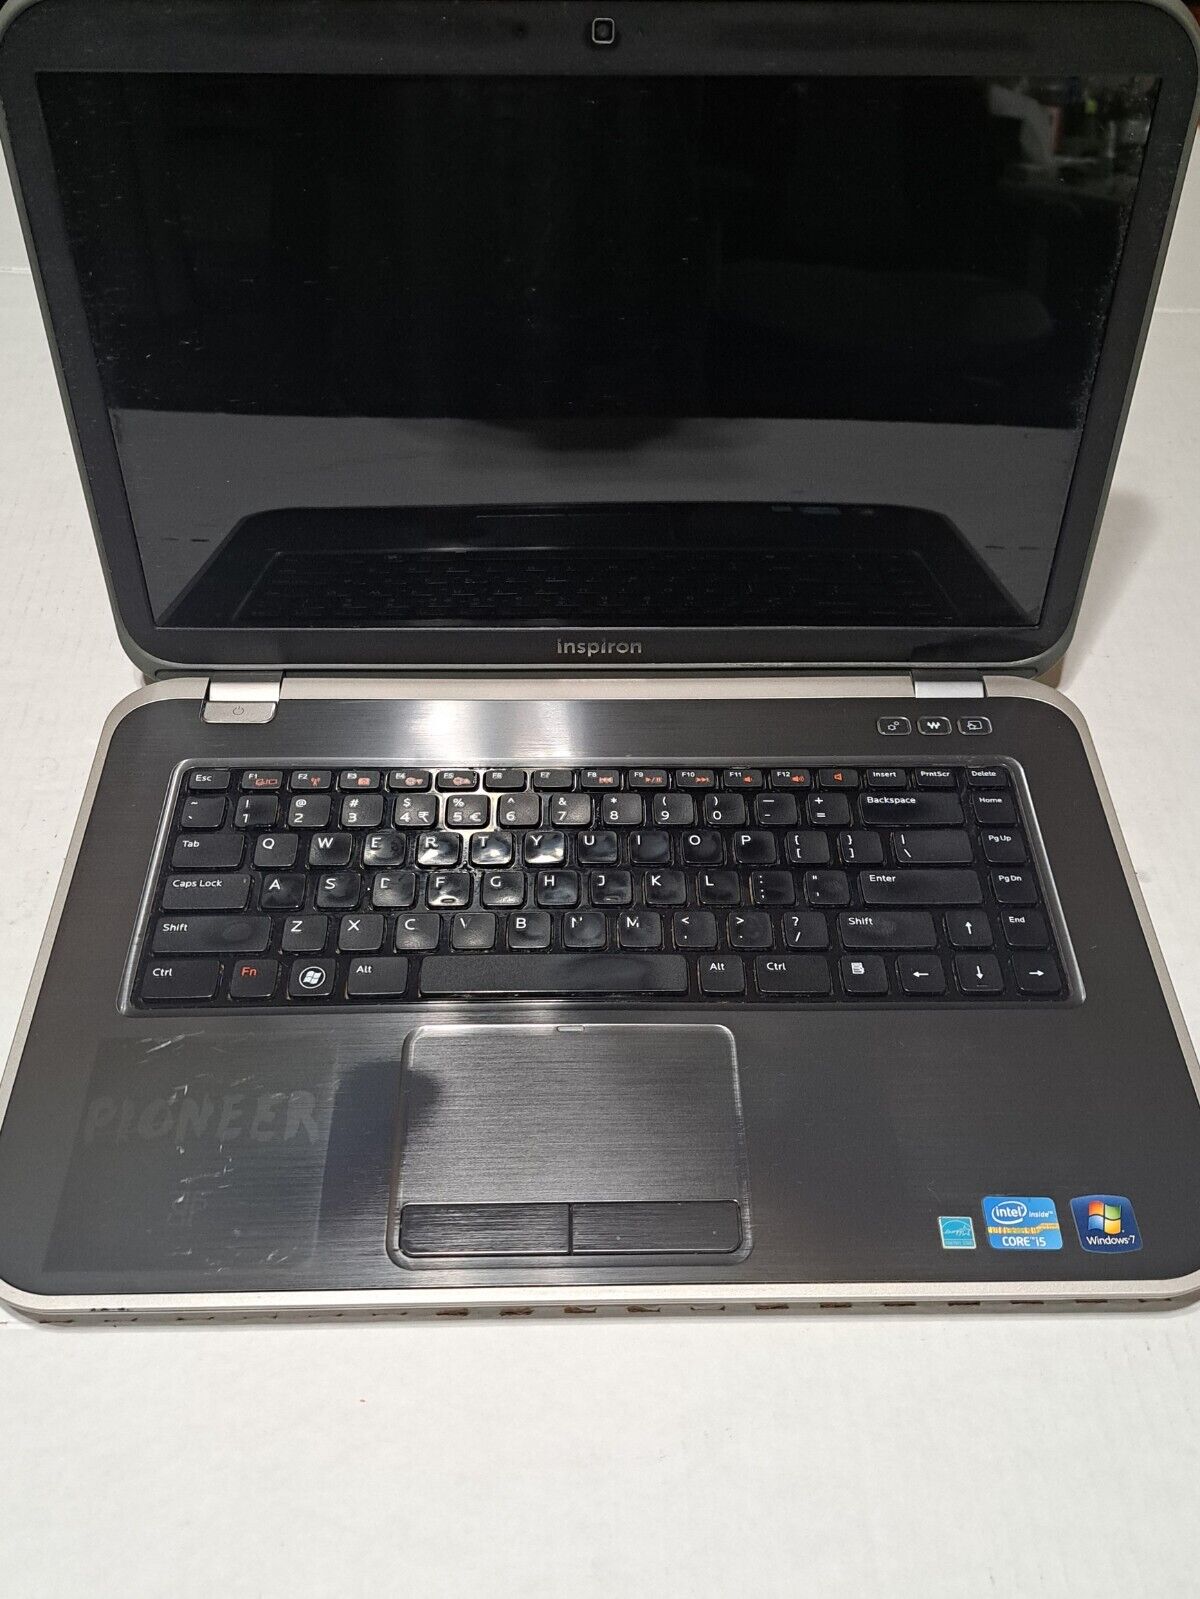 DELL INSPIRON 15R 5520 LAPTOP PC FOR PARTS OR REPAIR ONLY NON-WORKING